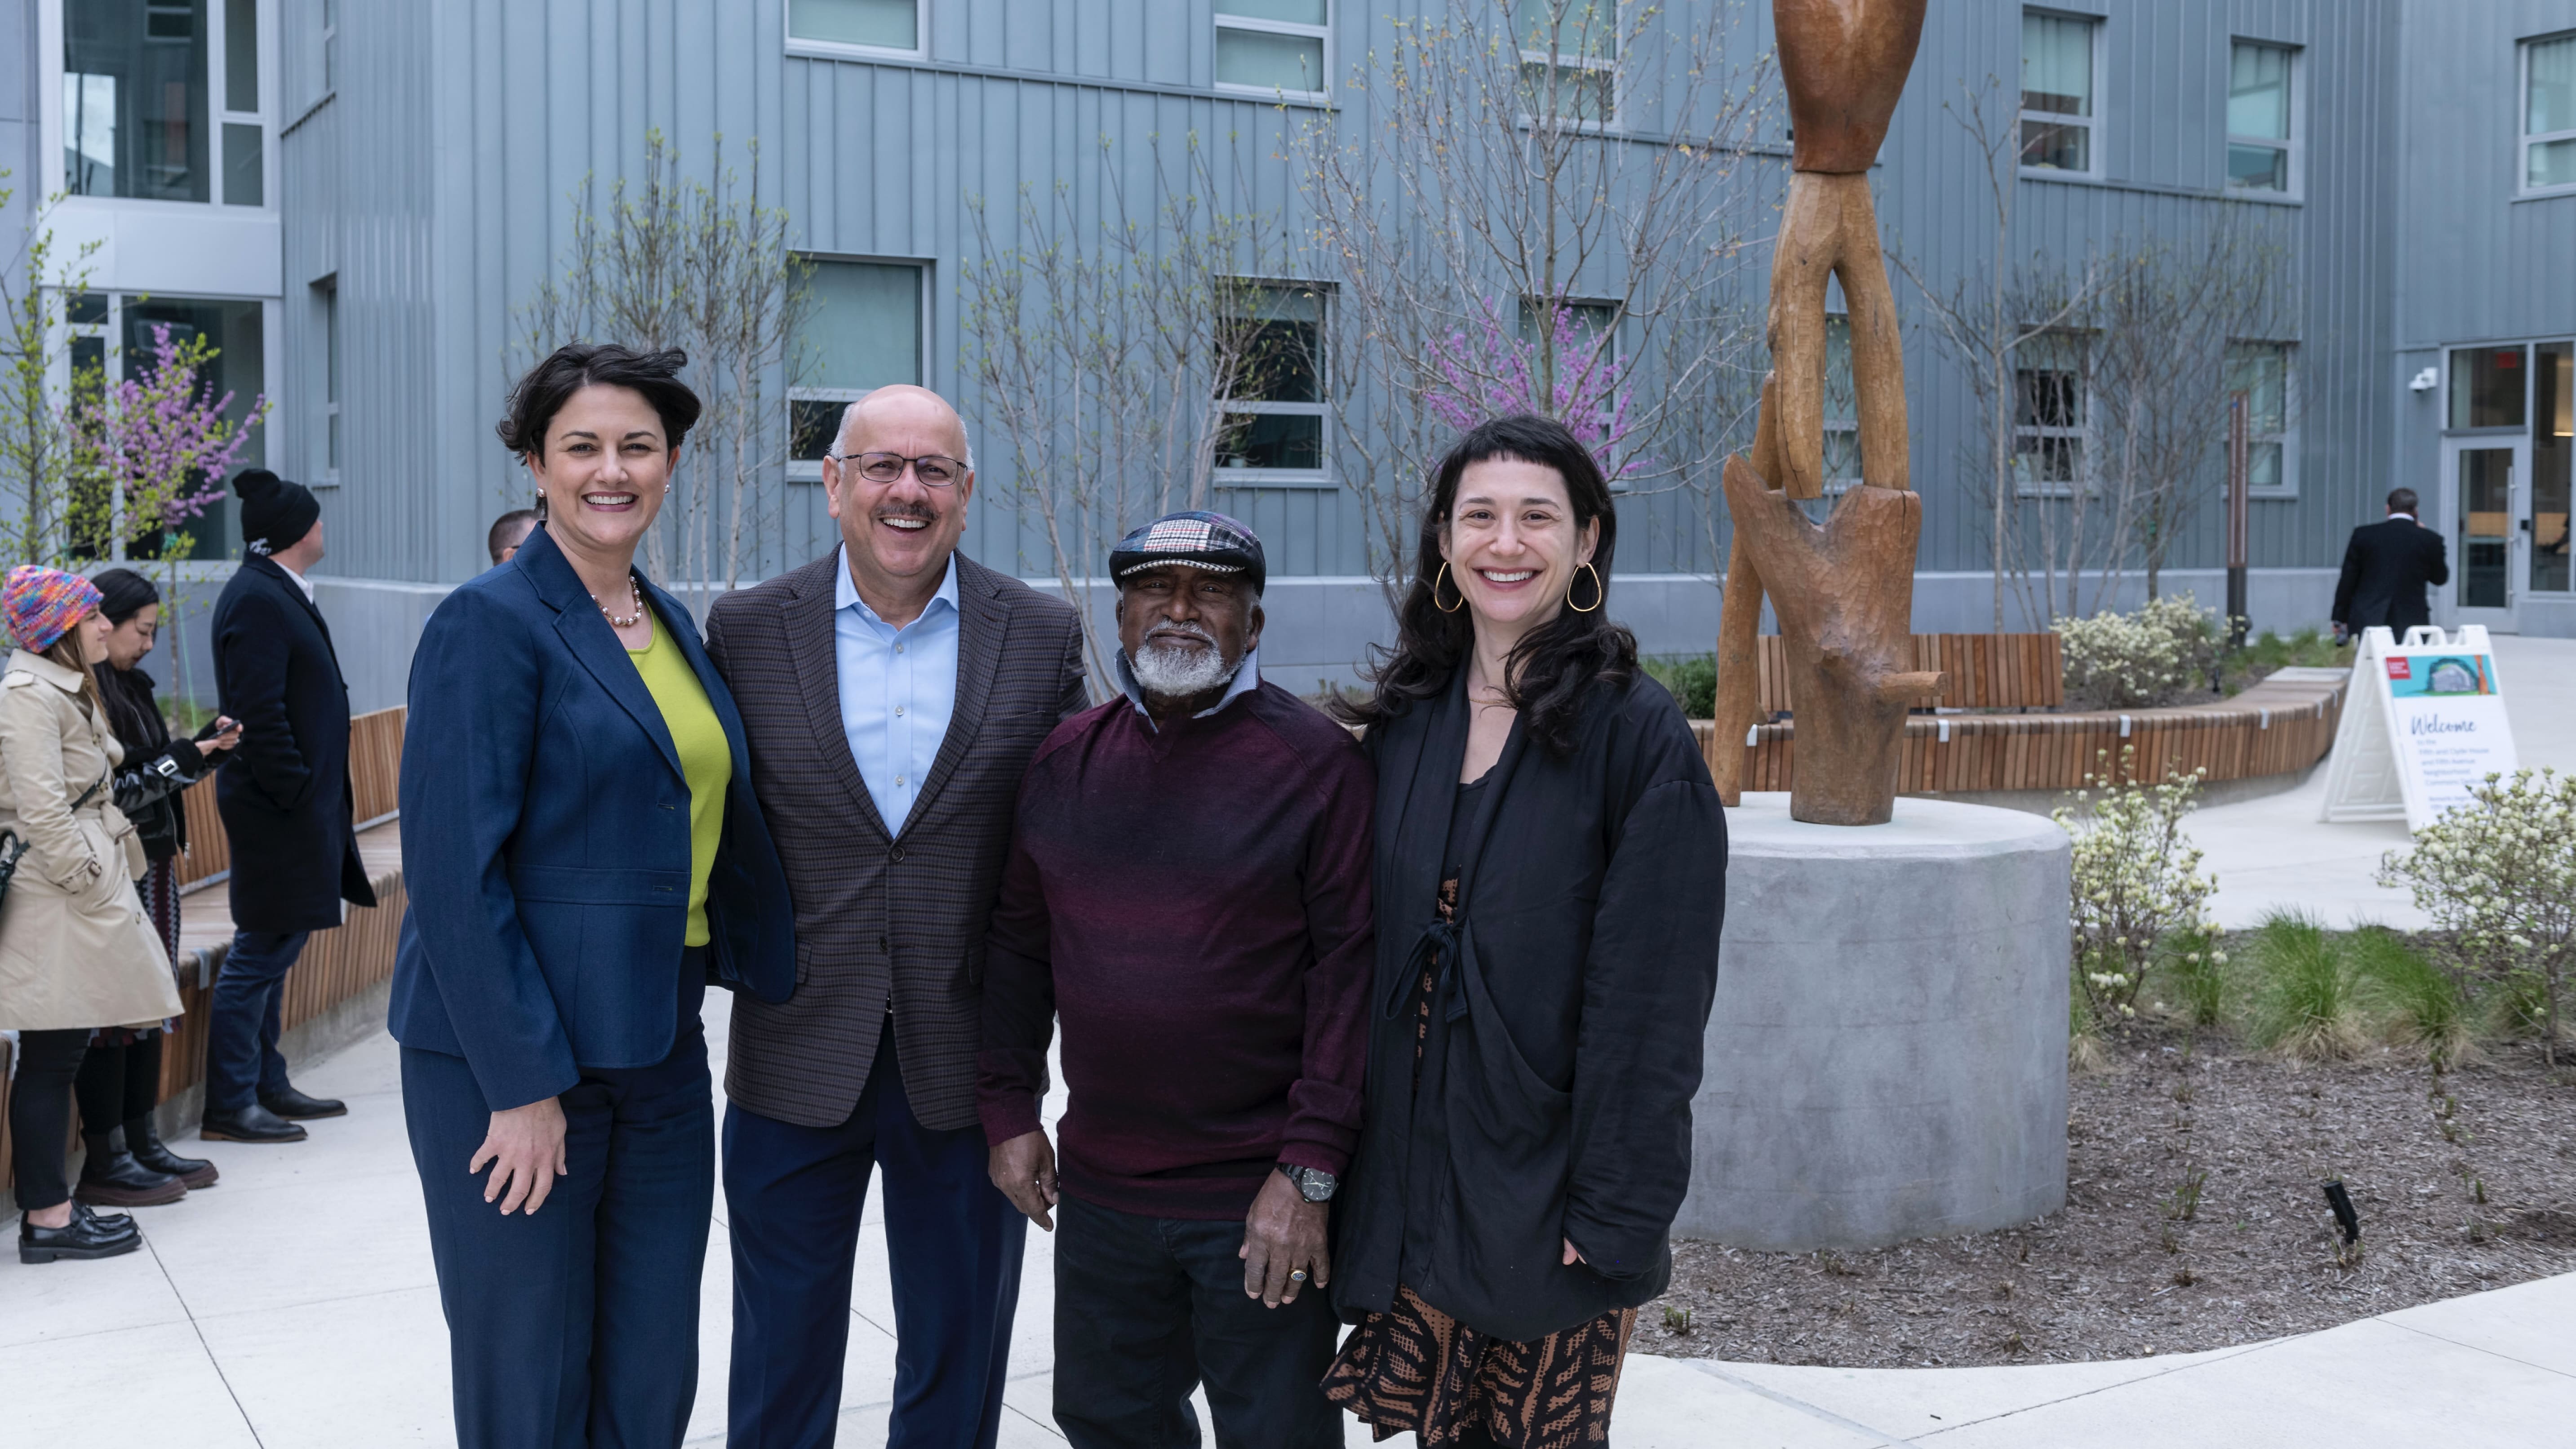 Farnam Jahanian and a group of CMU leaders stand in front of a public art sculpture outside the new Fifth and Clyde Residence Hall on CMU's campus